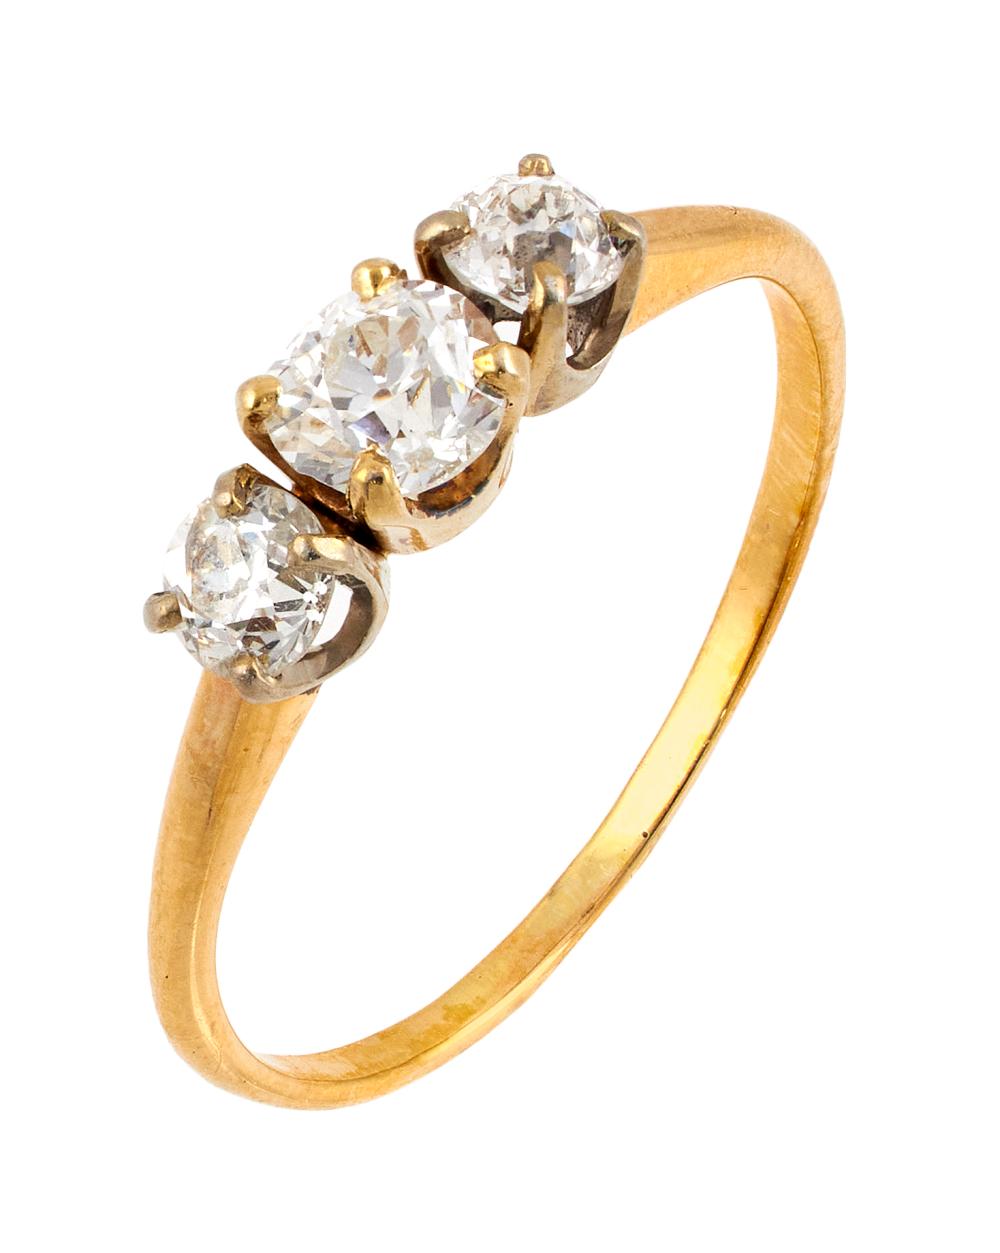 14KT YELLOW GOLD AND DIAMOND RING 350c21